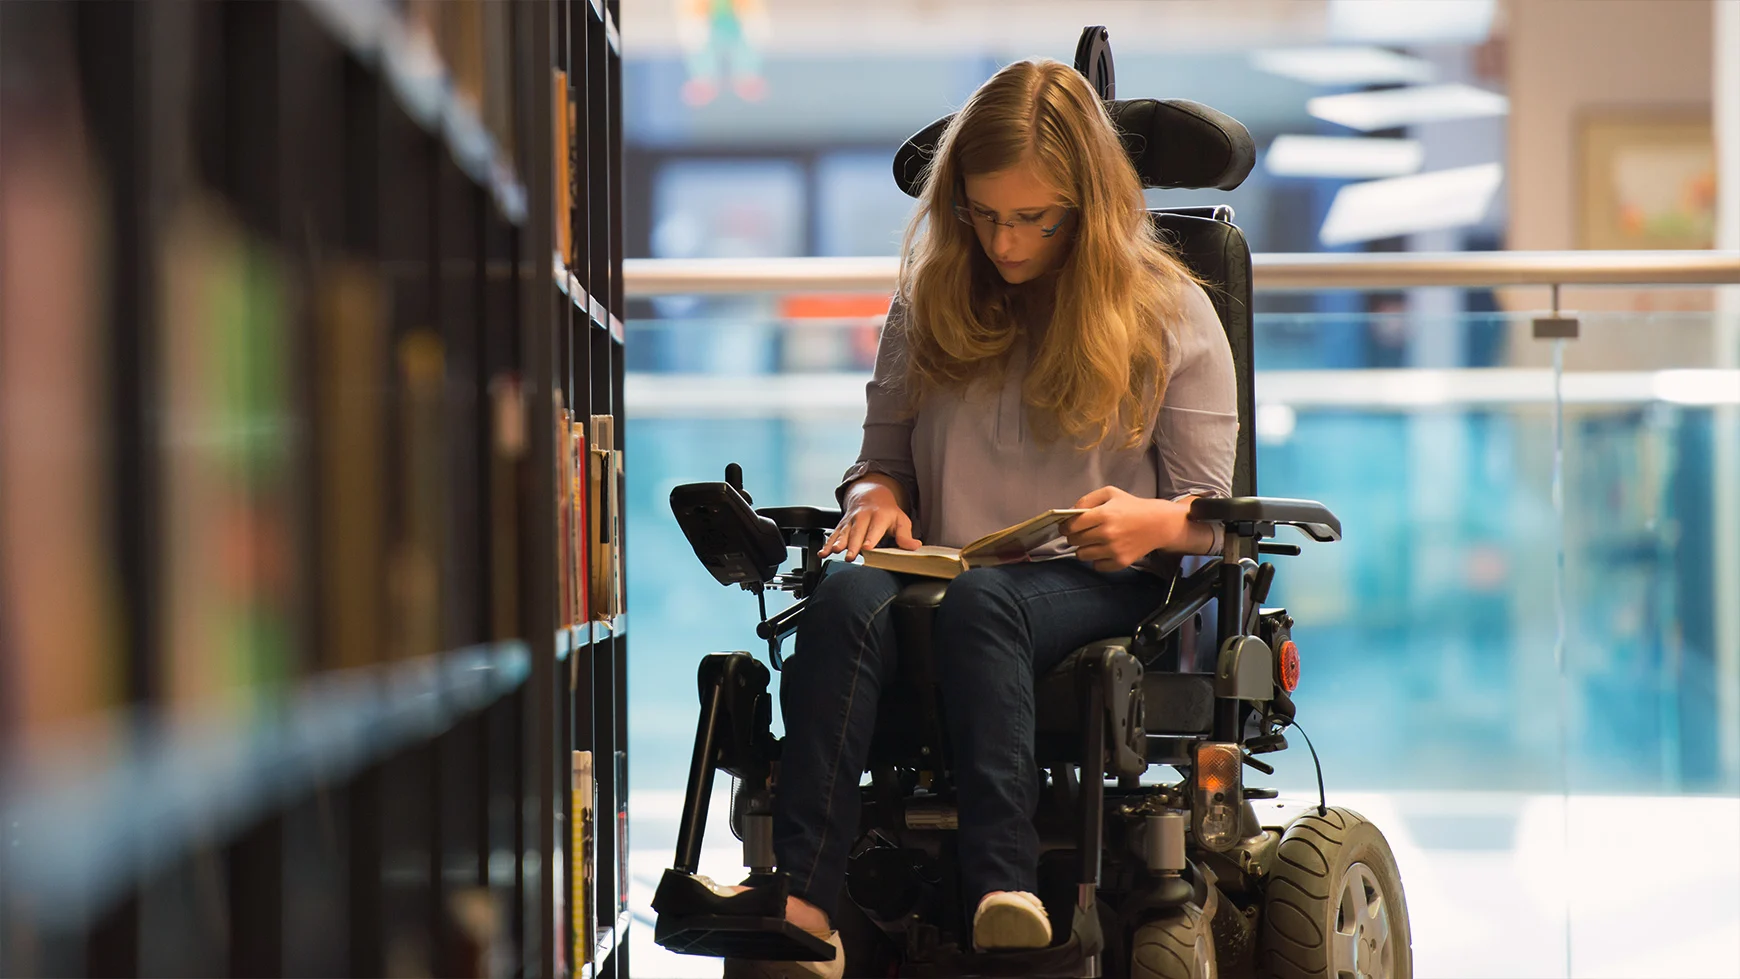 A child with long hair and glasses is holding and reading a book at the library while sitting in their wheelchair.